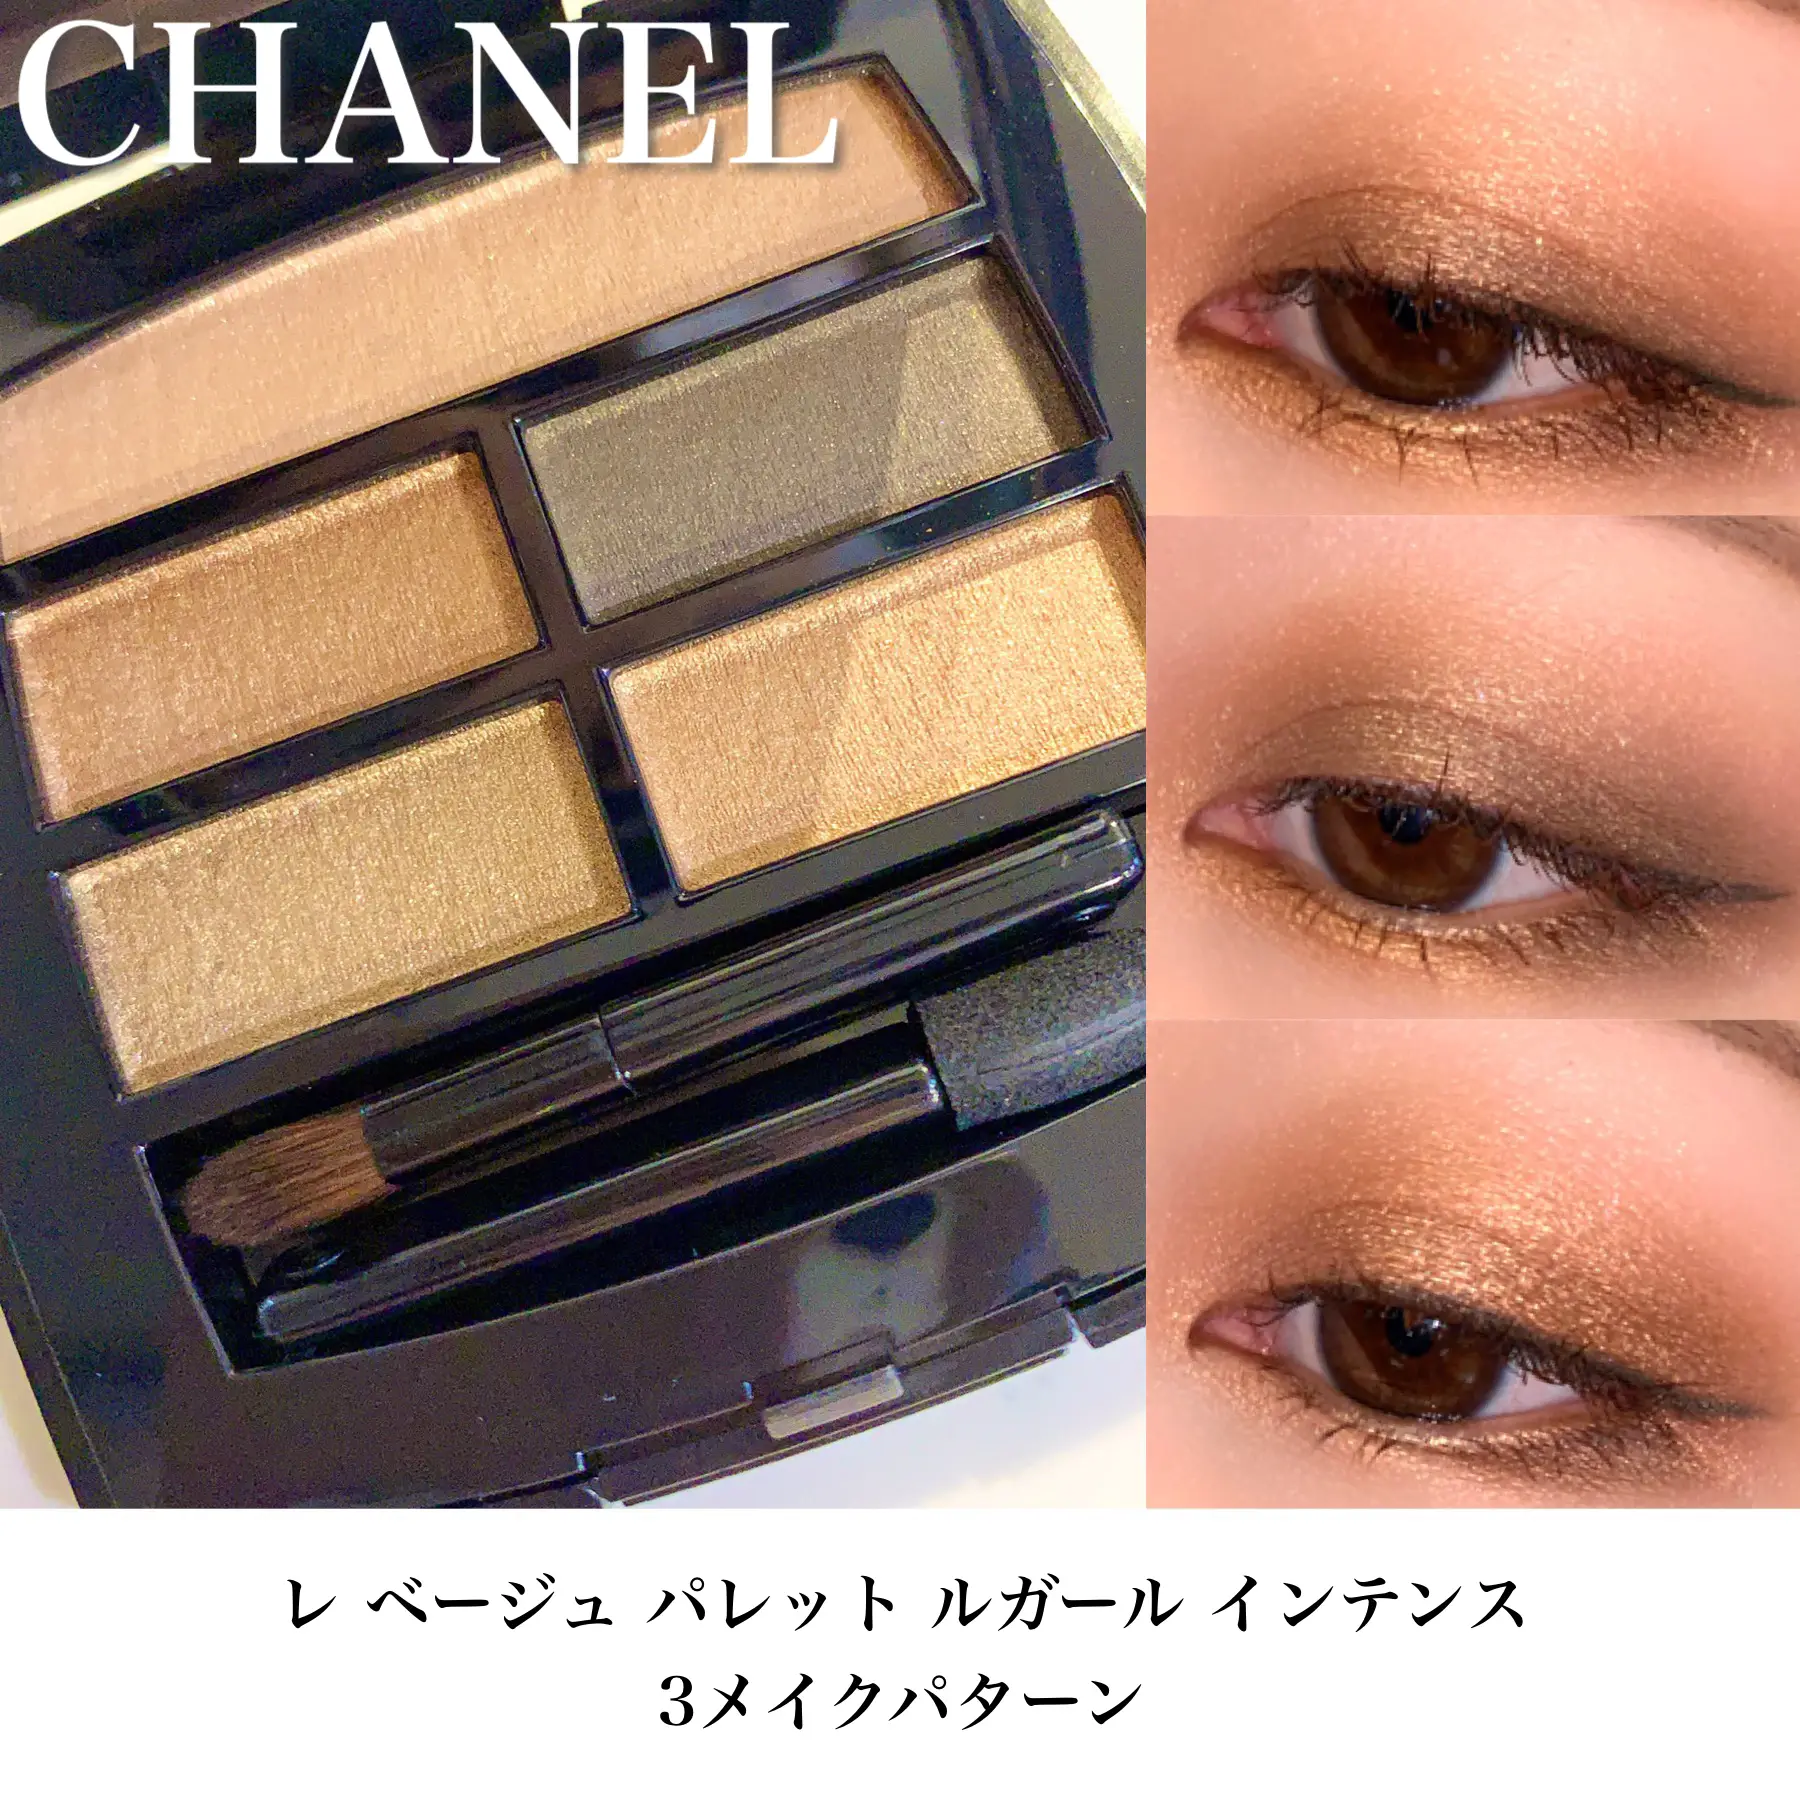 3 Makeup Patterns Using CHANEL New Intense❤️, Gallery posted by eina